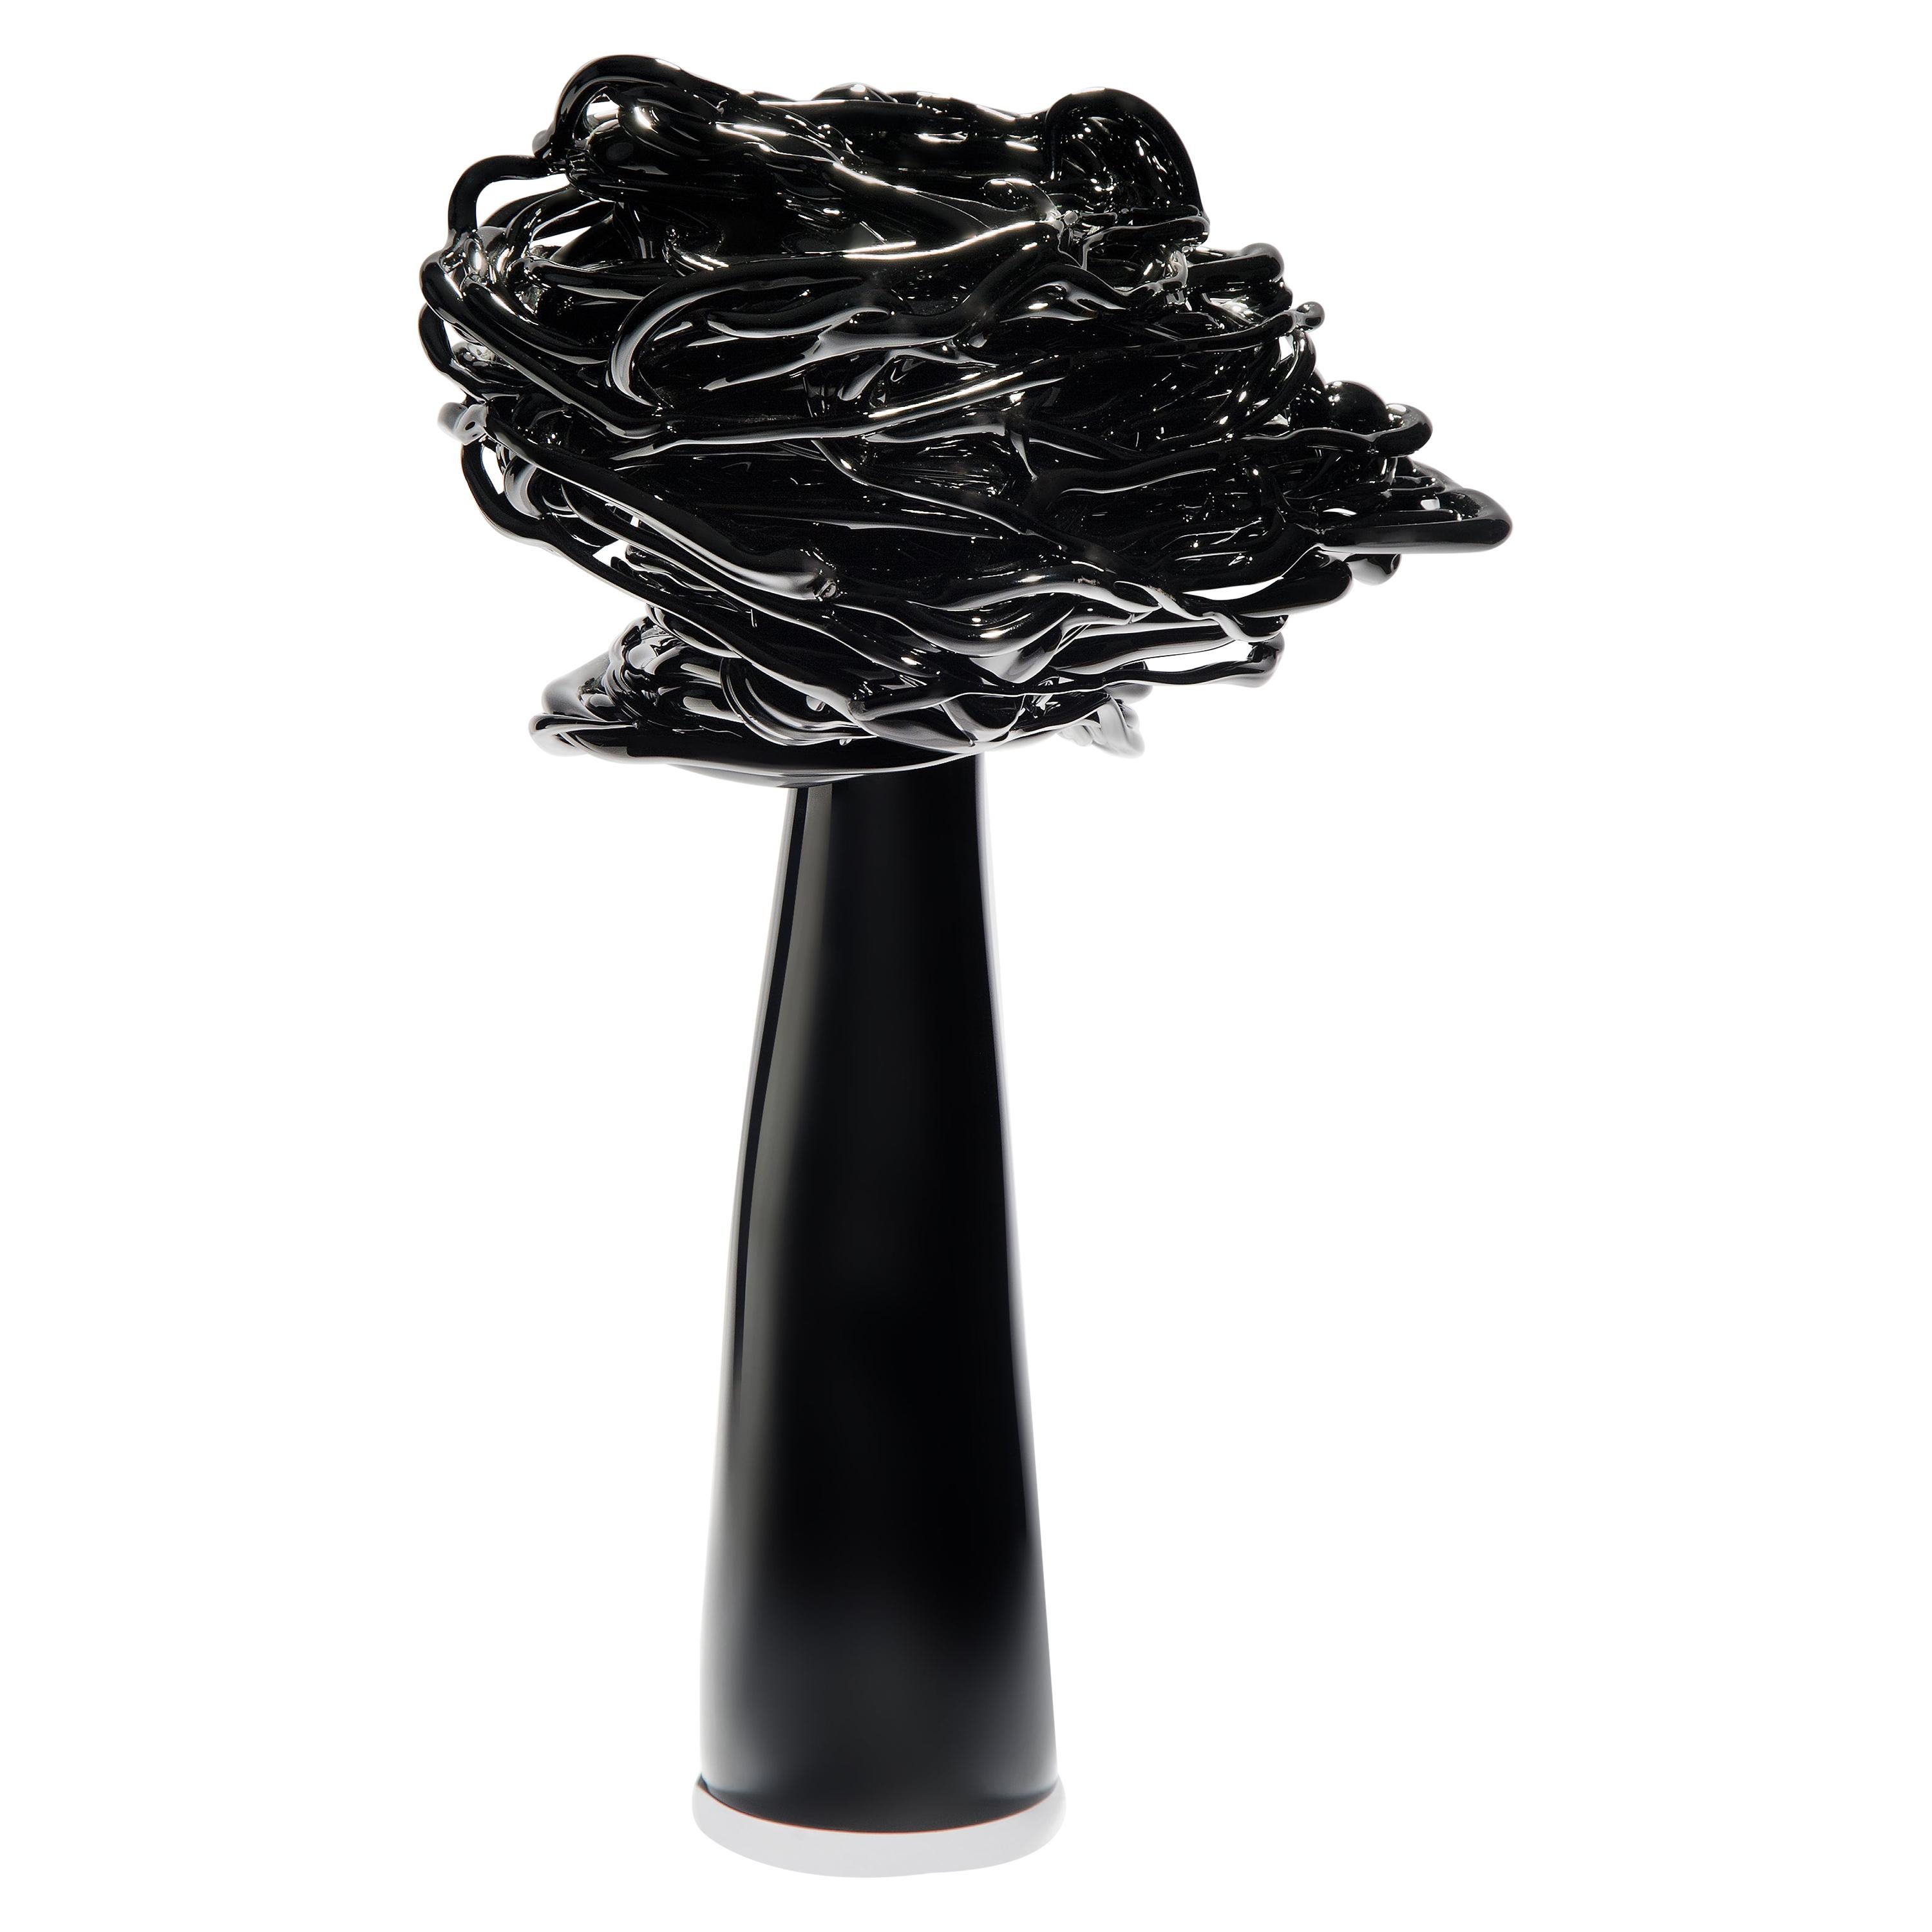 Wind of Night, a Unique Black Glass Tree Sculpture by Remigijus Kriukas For Sale